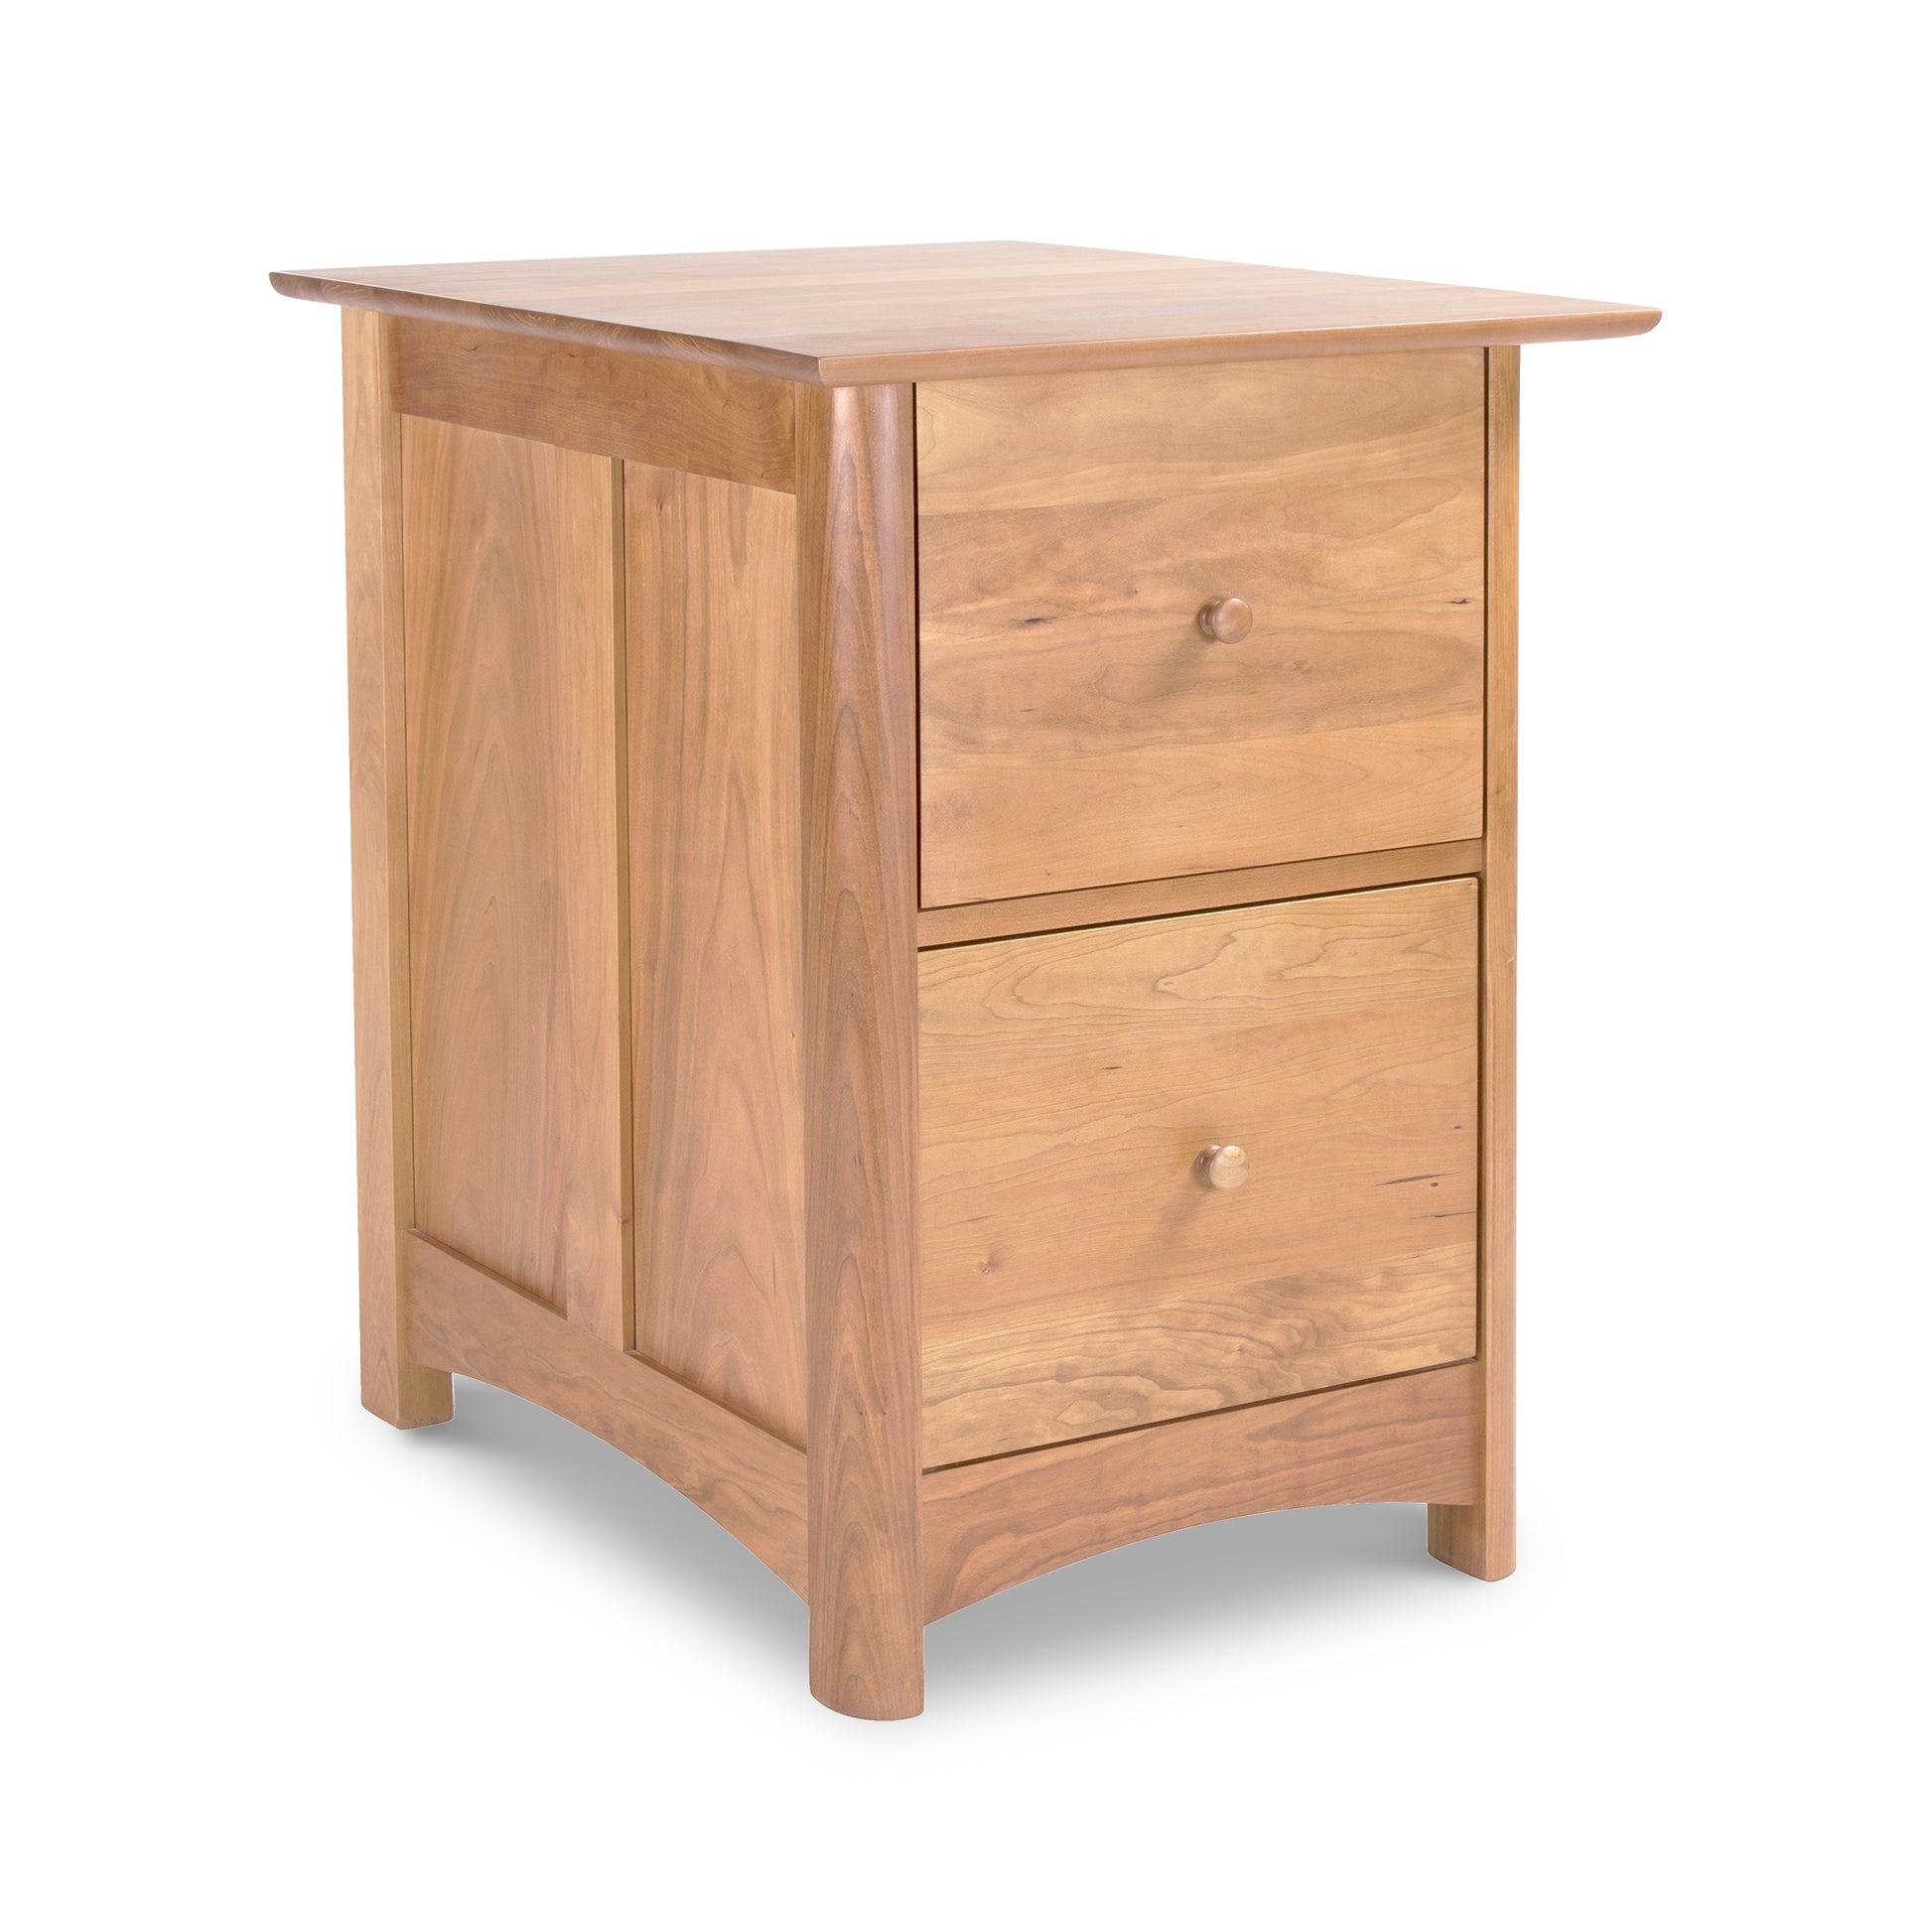 A Heartwood Shaker 2-Drawer Vertical File Cabinet from Vermont Furniture Designs isolated on a white background.